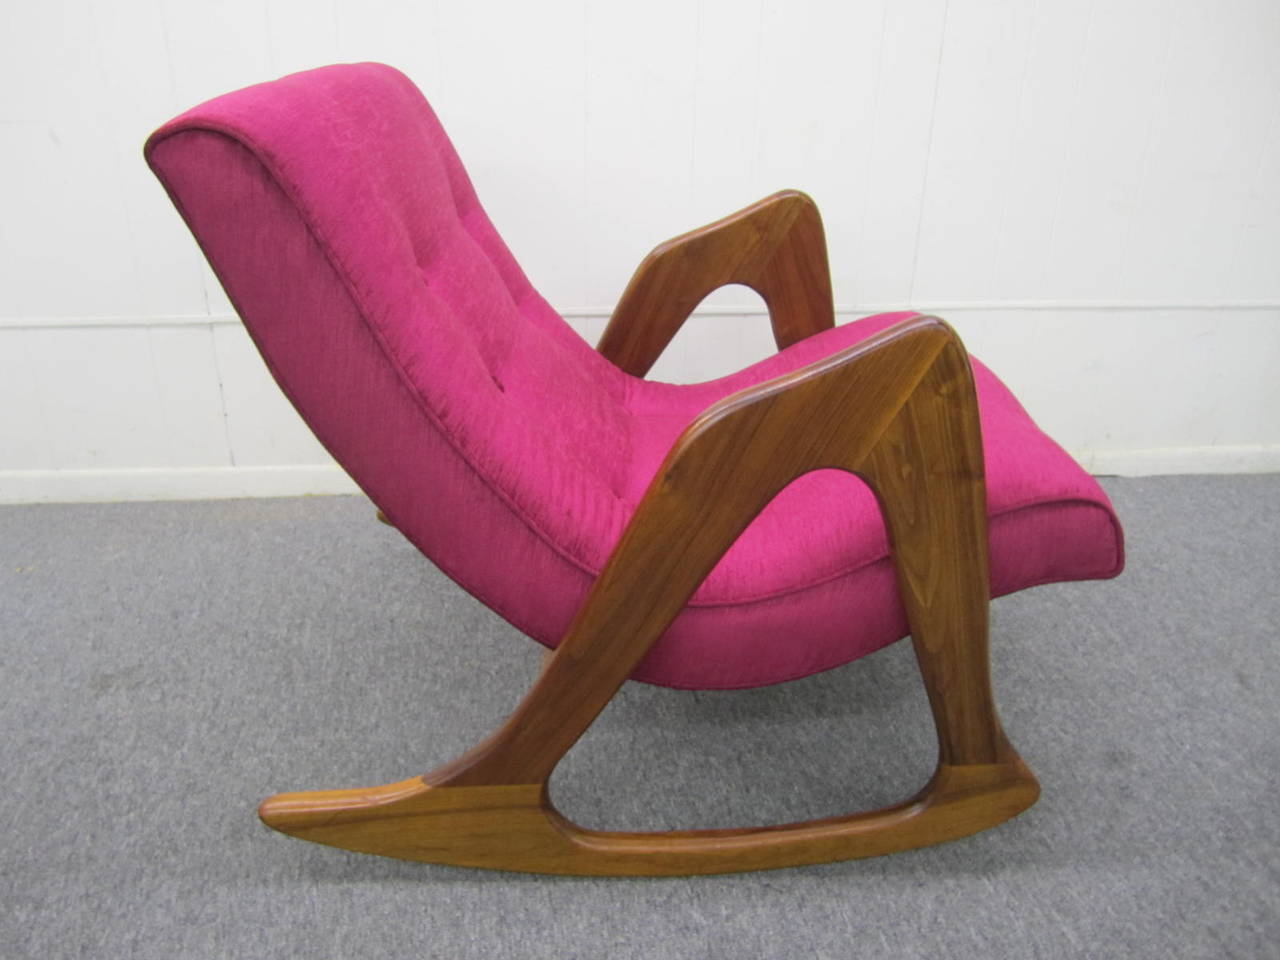 Spectacular Adrian Pearsall walnut rocking chair for craft associates. This fabulous sculptural rocker is in great vintage condition. The high end raspberry velvet upholstery and foam are brand new. The base retains its vintage finish in nice